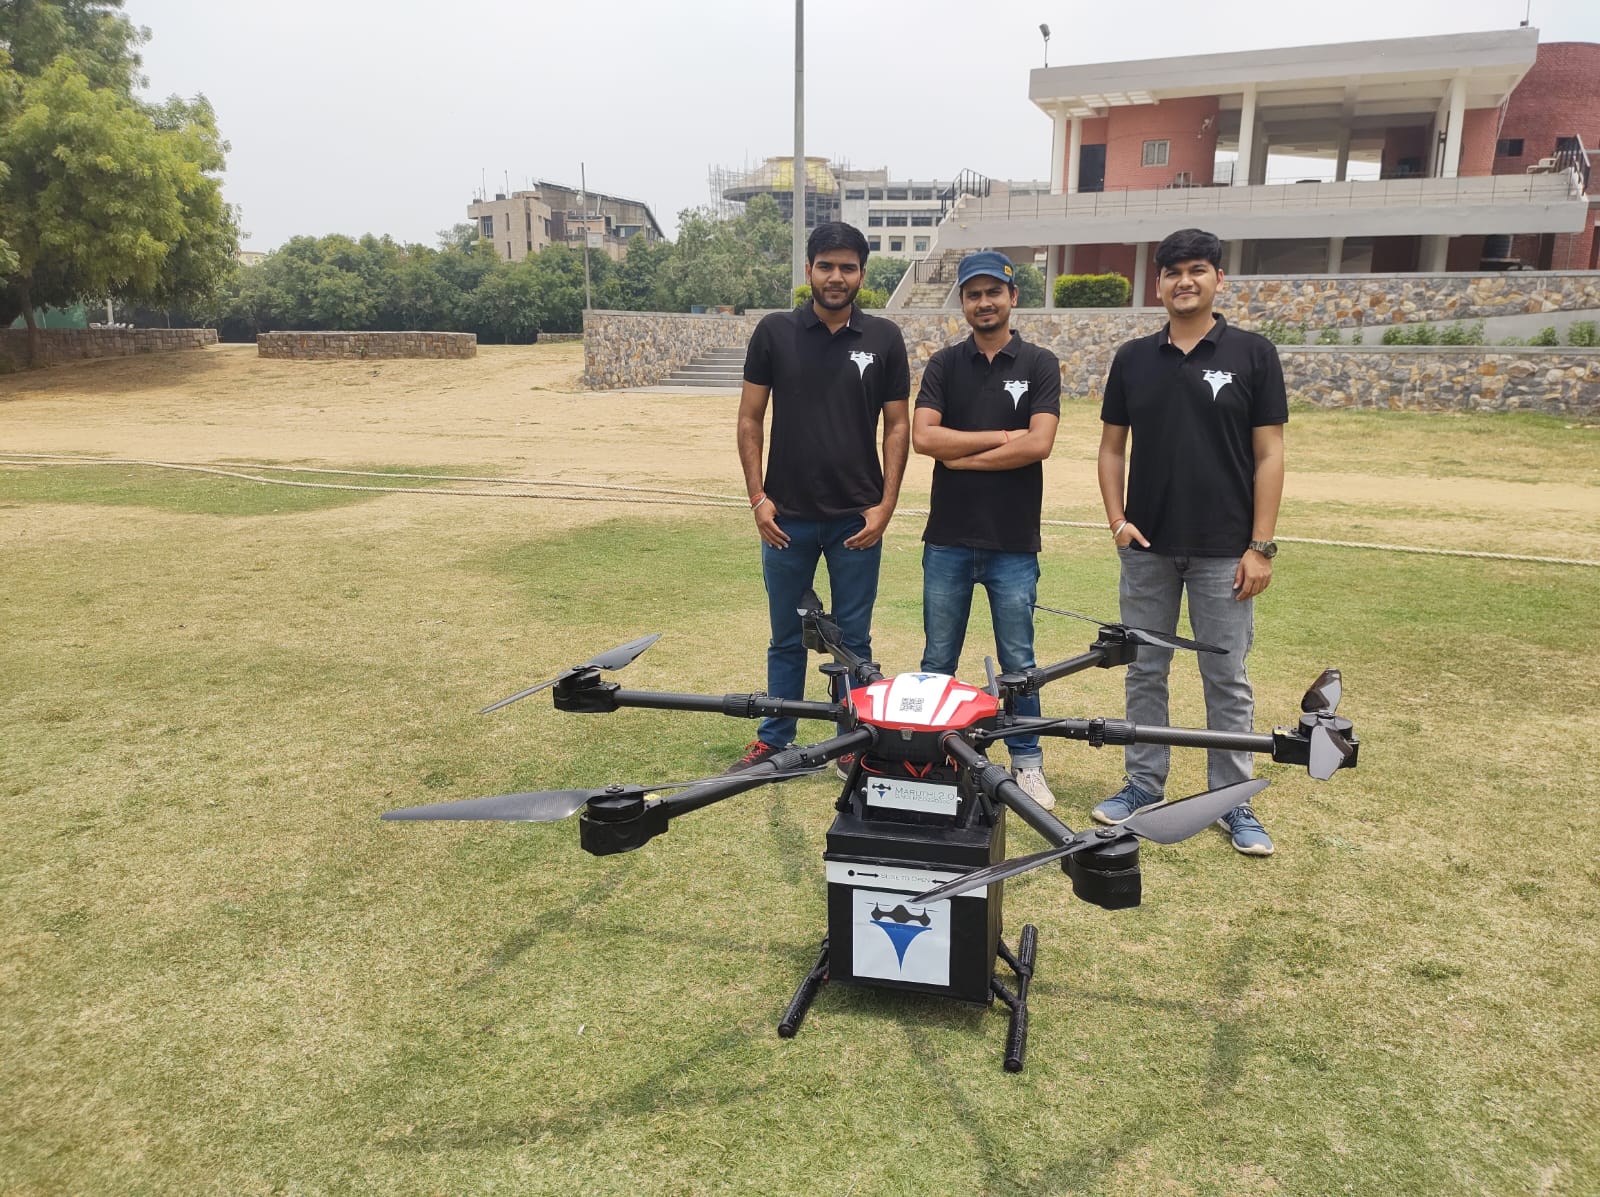 TSAW crew with Maruthi 3.1, Drone delivery service, the fastest and most convenient way to get your packages.